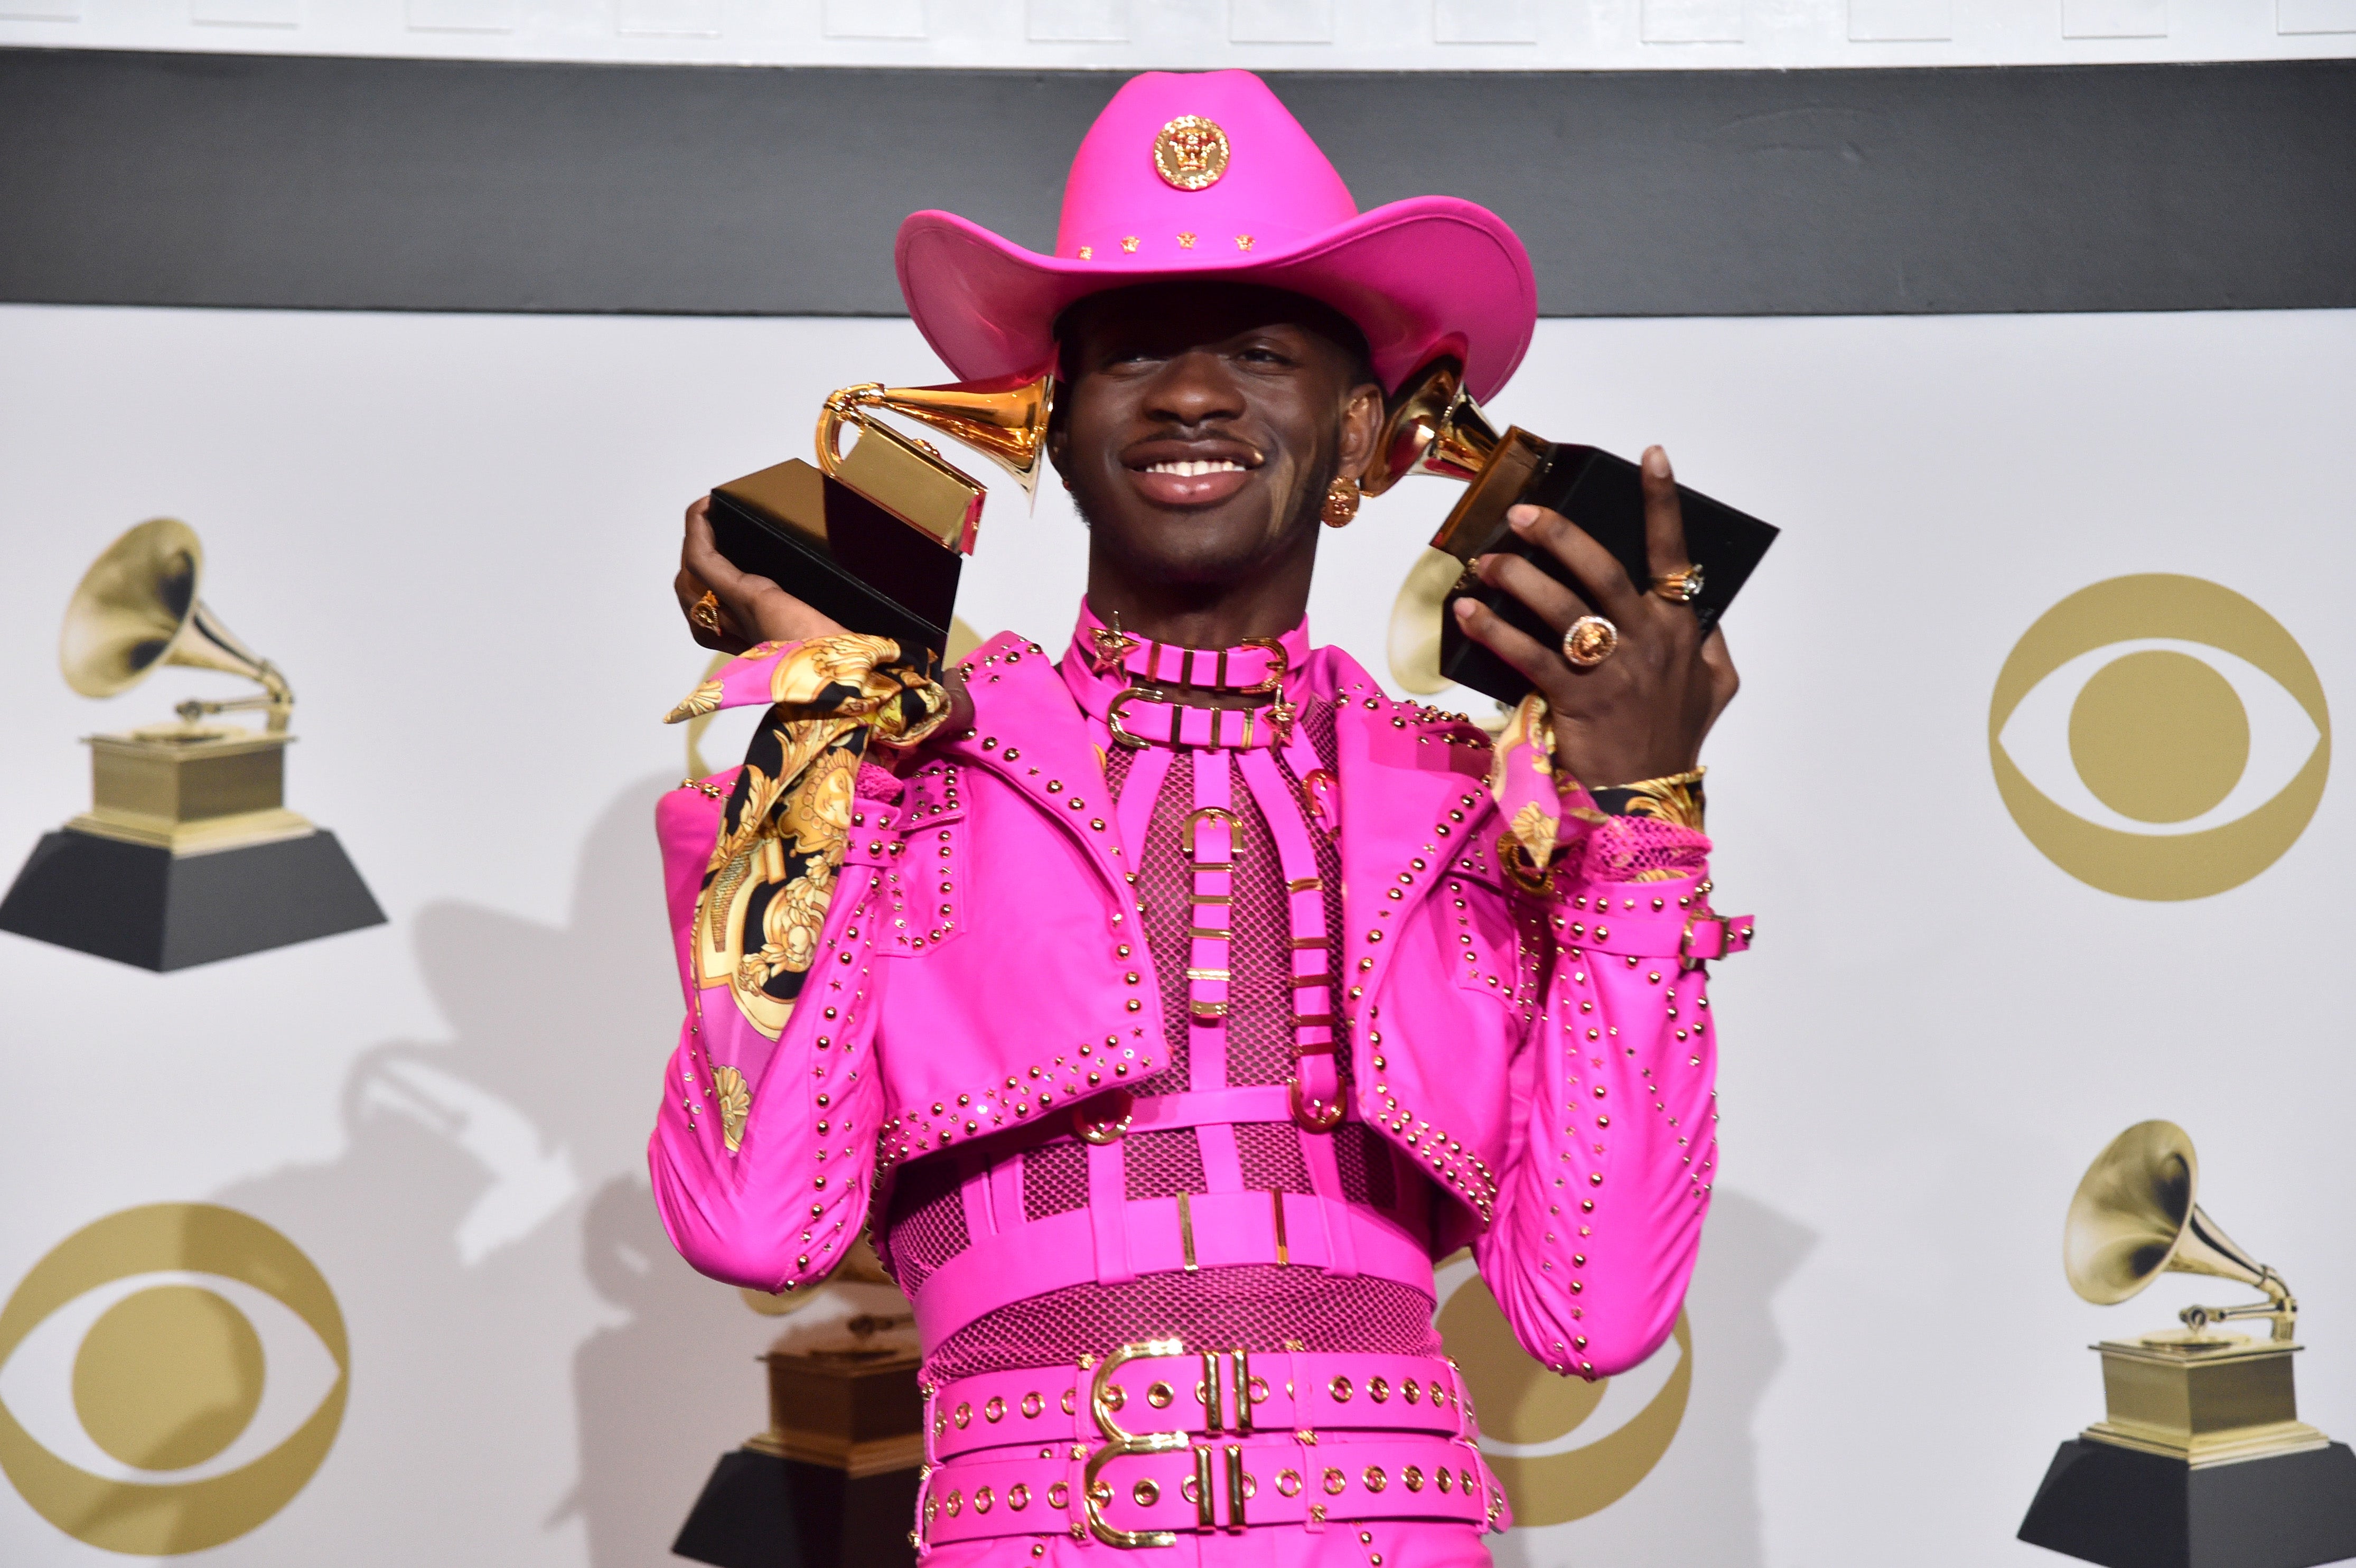 Artists such as Lil Nas X received similarly frosty receptions from Nashville with their ventures into country music